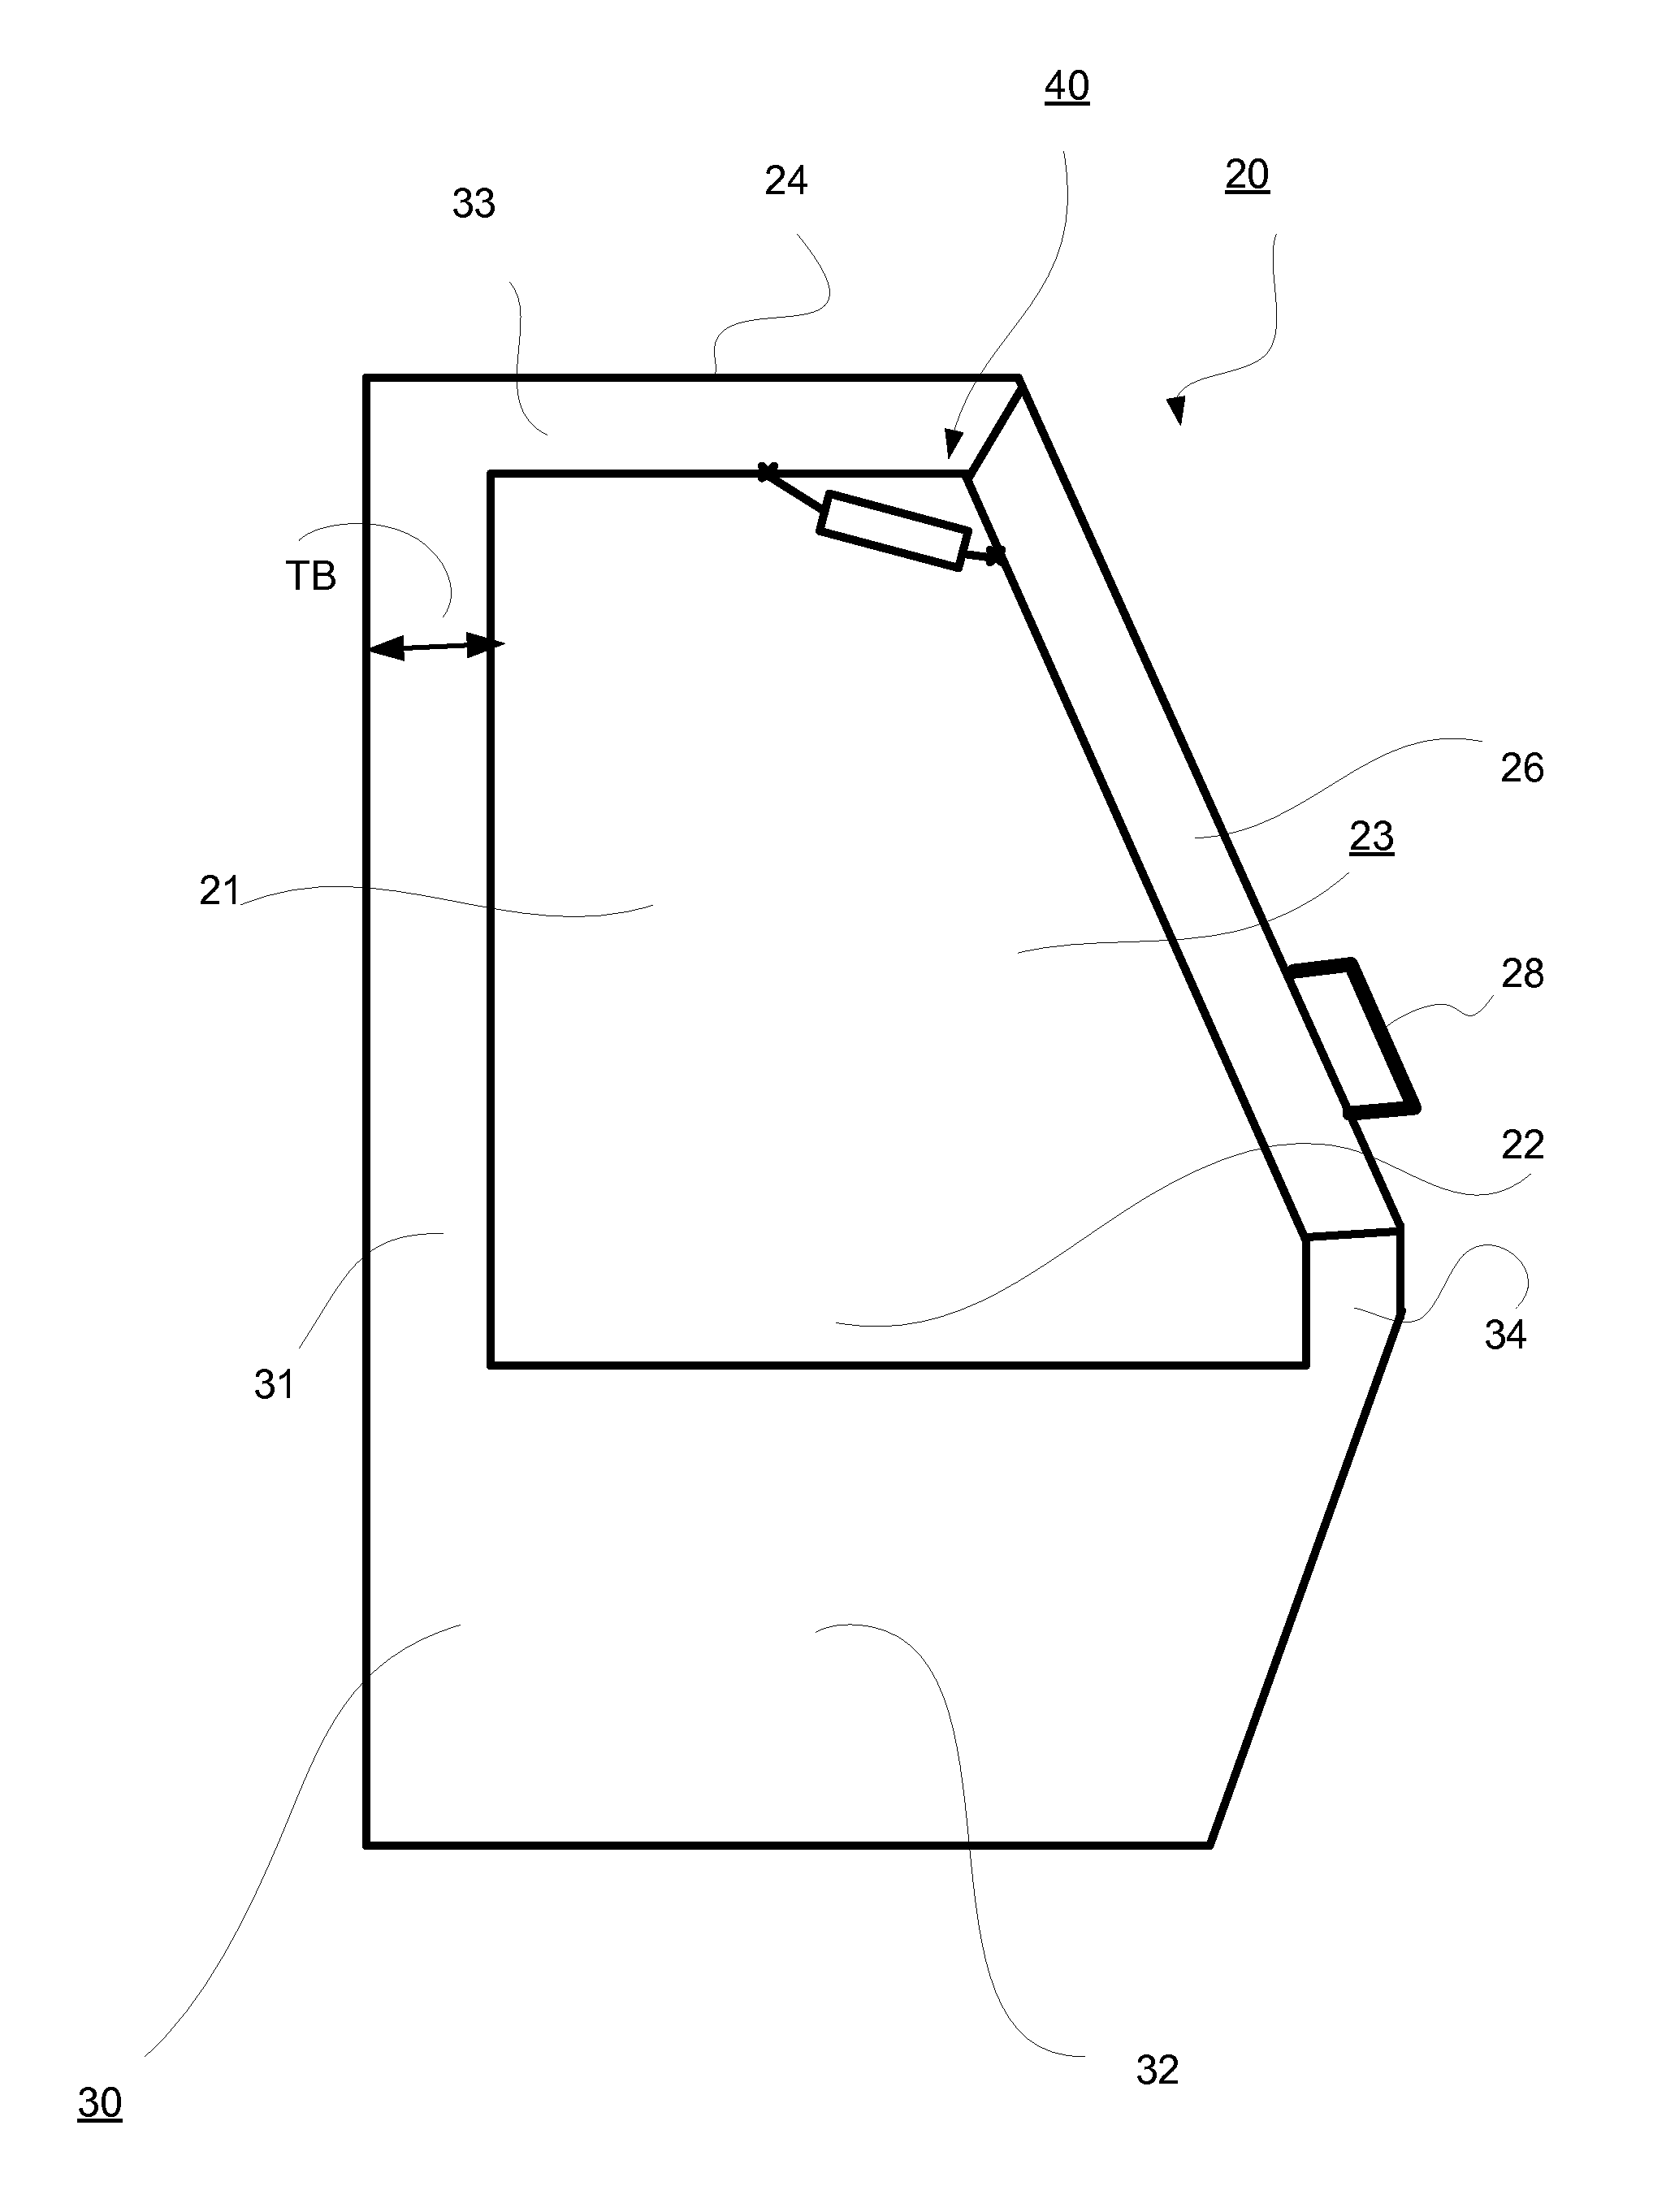 Temperature controlled display cabinet, in particular a freezer island, comprising a door